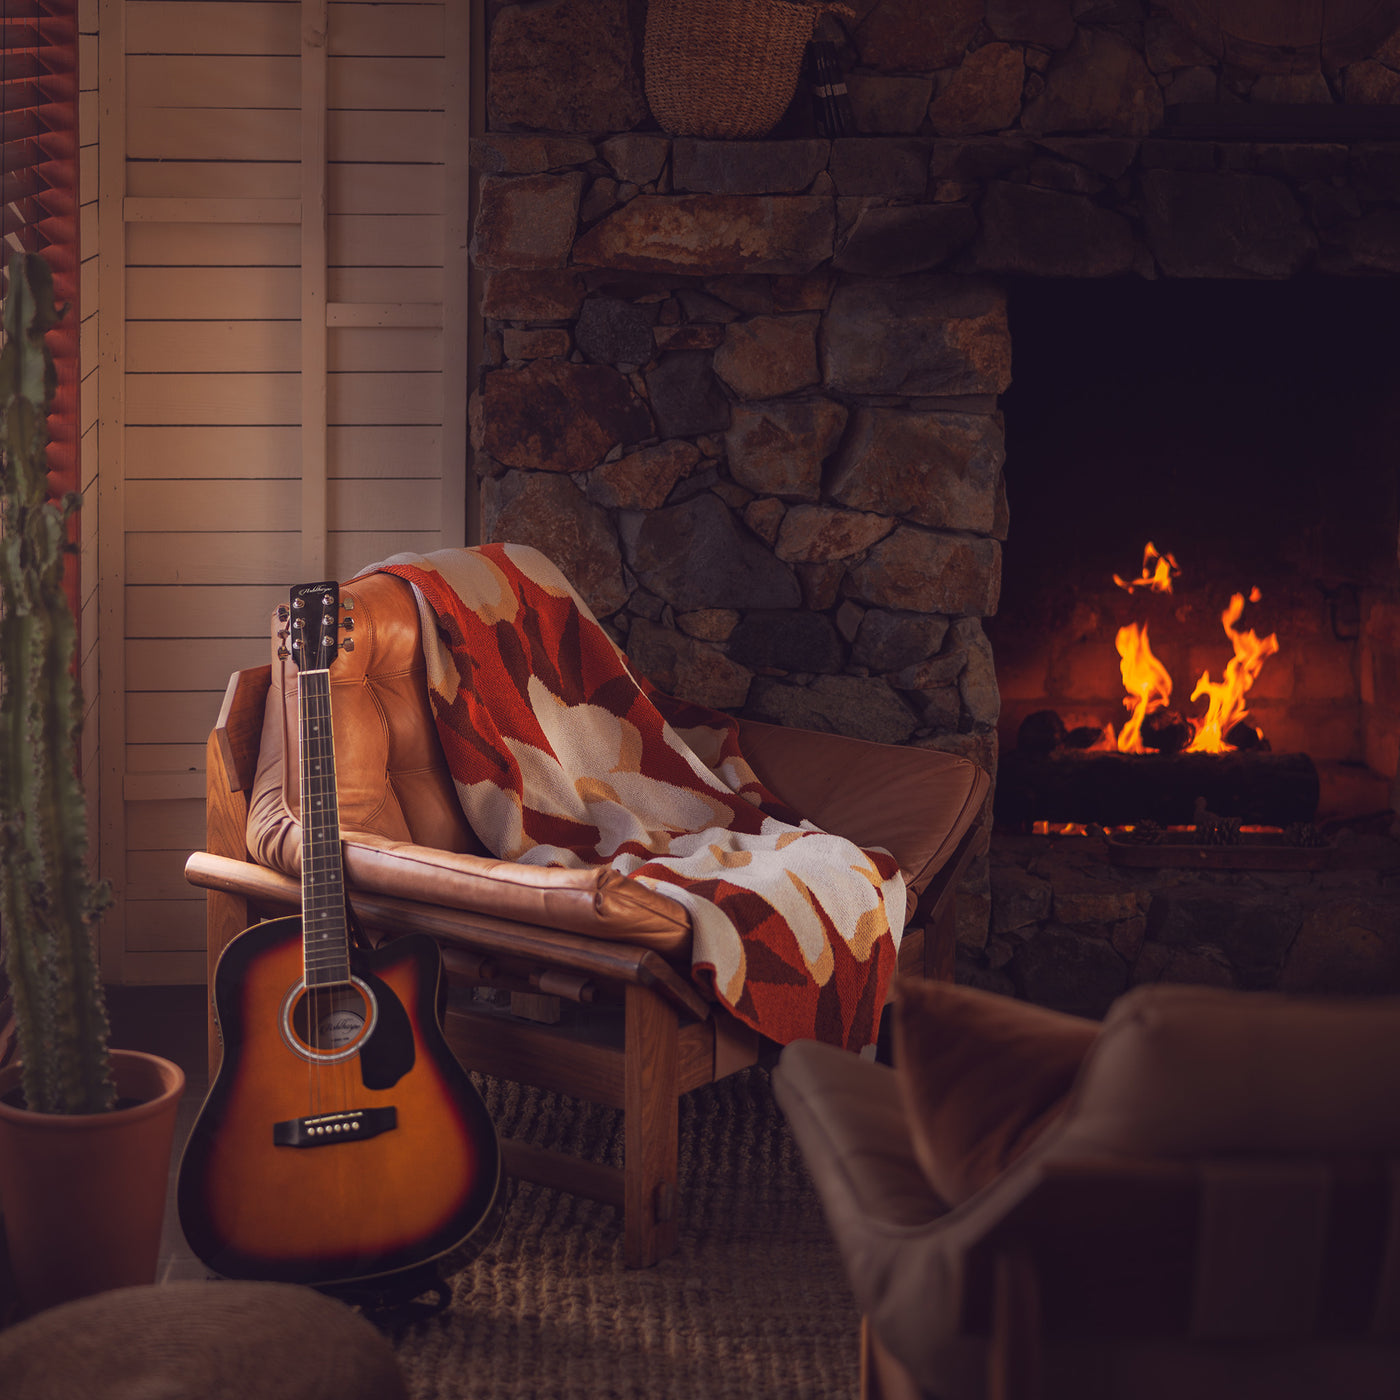 Rust Flower Cotton Throw by the Fire with Guitar